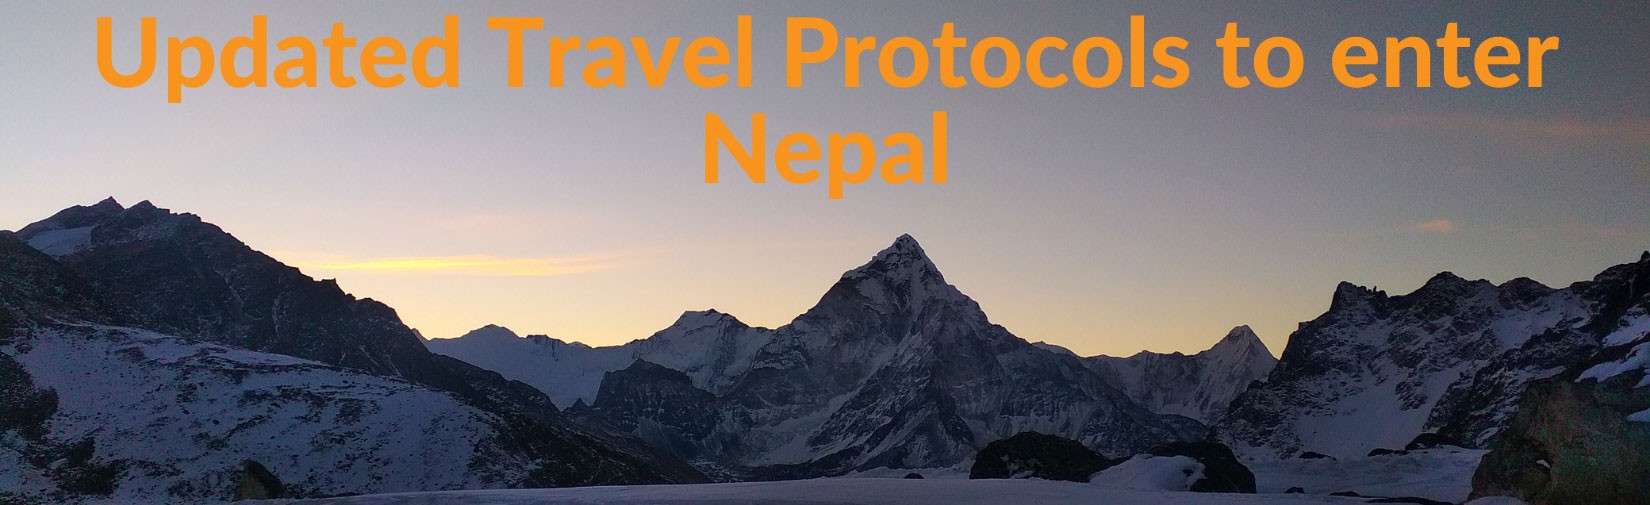 Updated_Travel_Protocols_to_enter_Nepal-2022